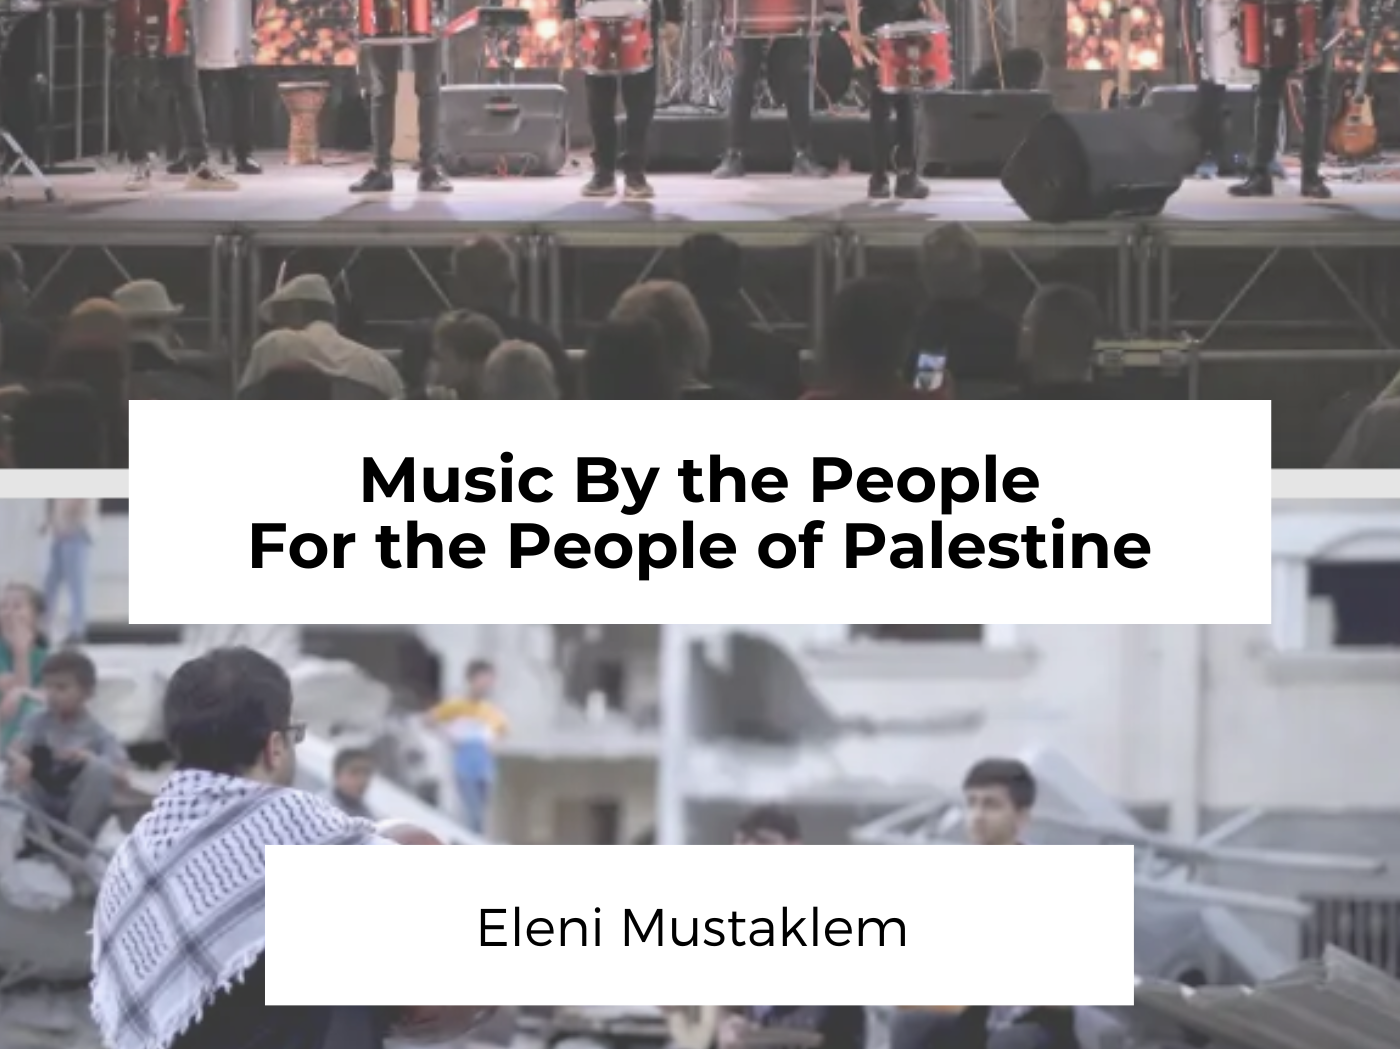 Music by the People for the People